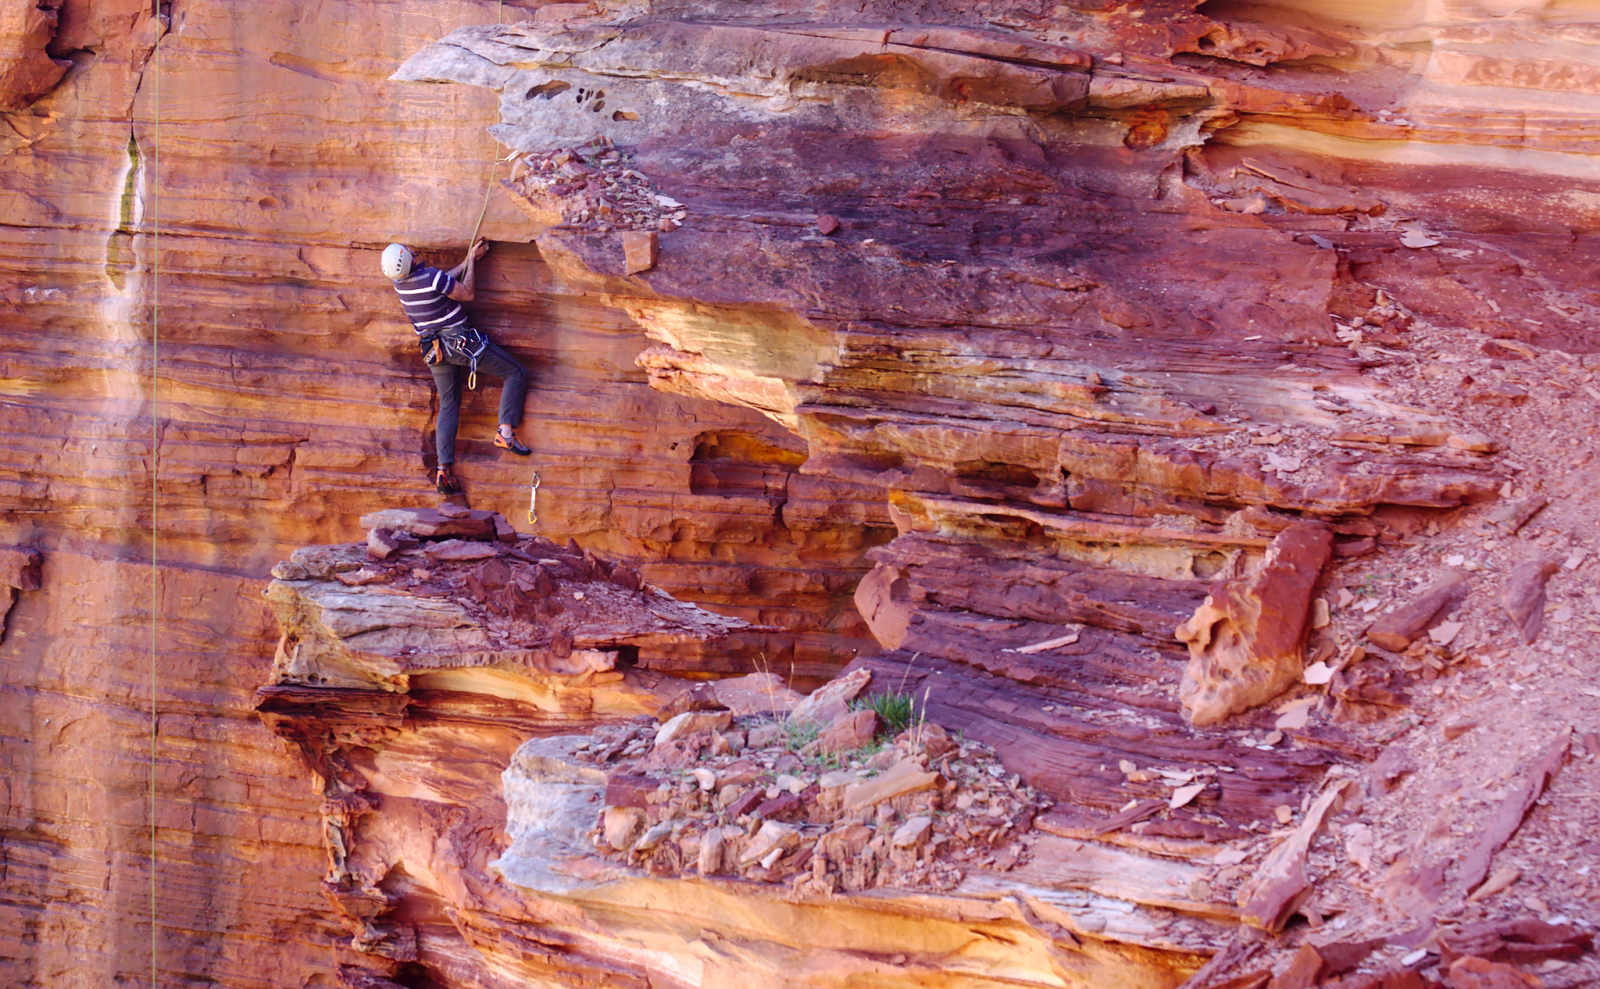 Trip to Kalbarri with Supervised Trad Climbing